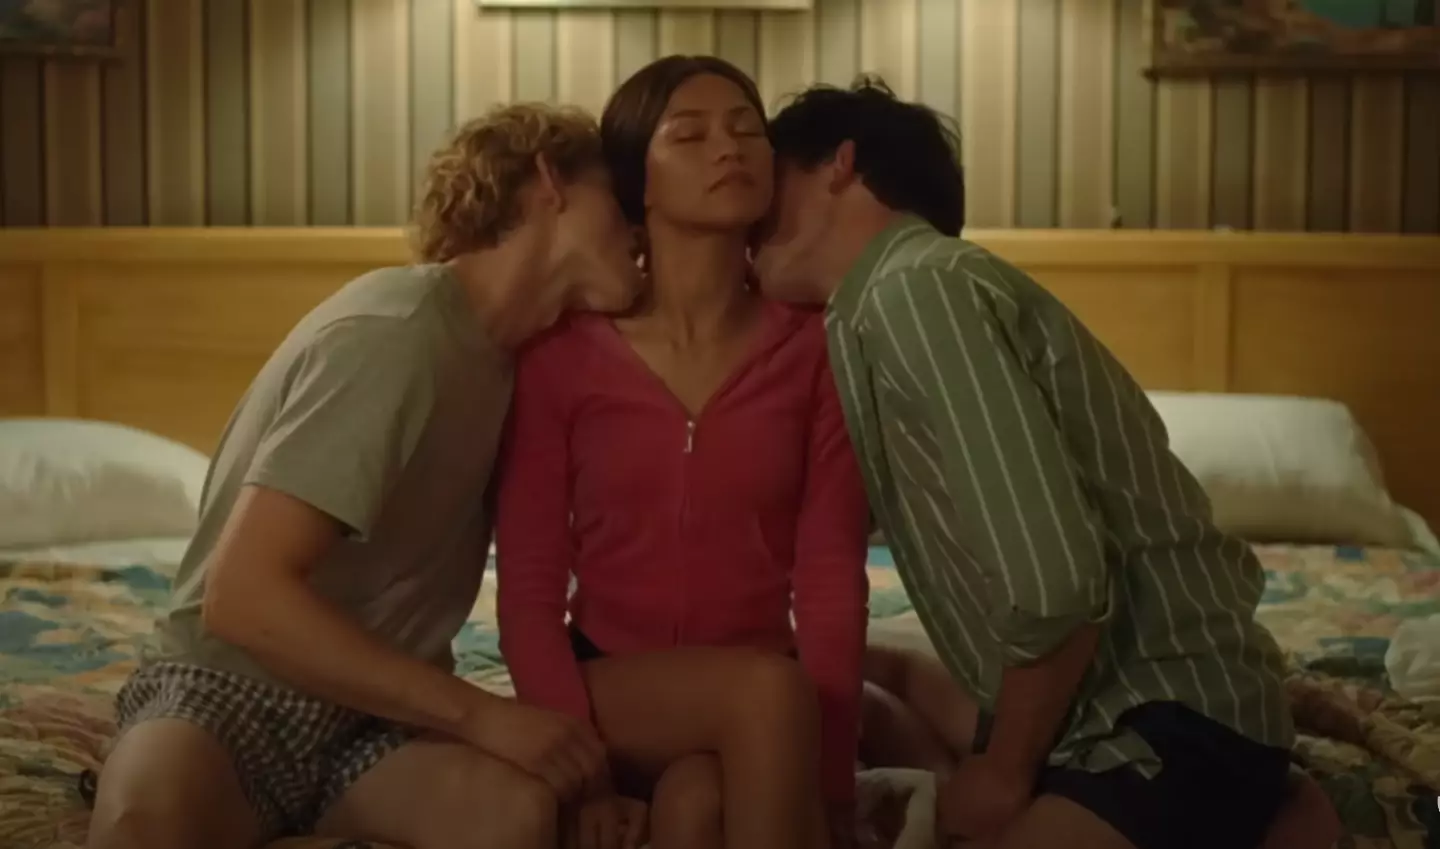 Zendaya said that she was completely comfortable in filming the threesome scenes. (Warner Bros.)